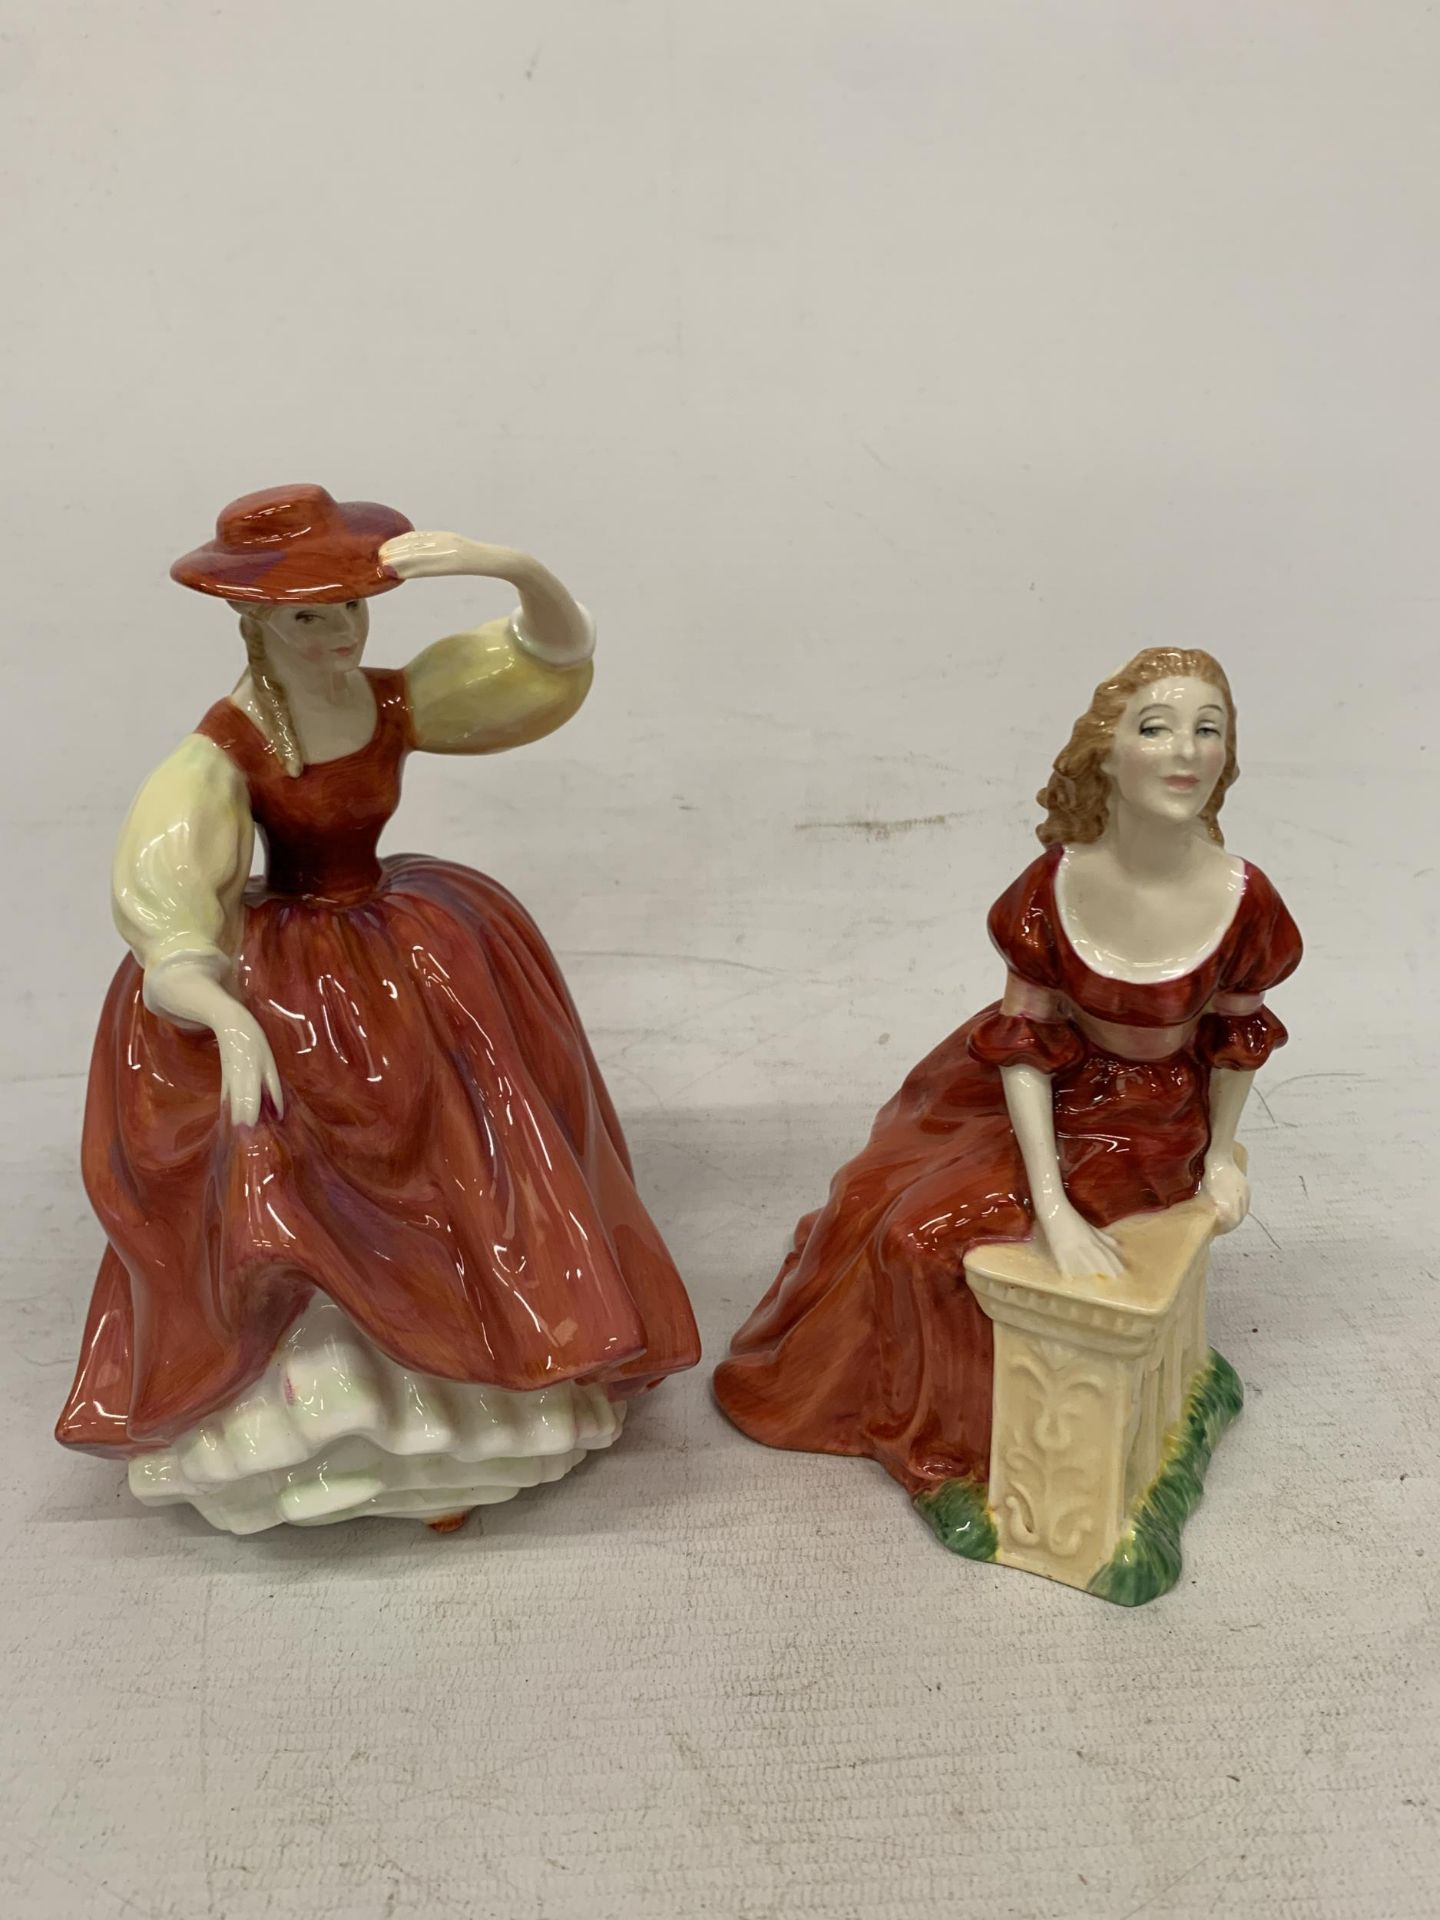 TWO ROYAL DOULTON FIGURINES "BUTTERCUP" AND "JUDITH"